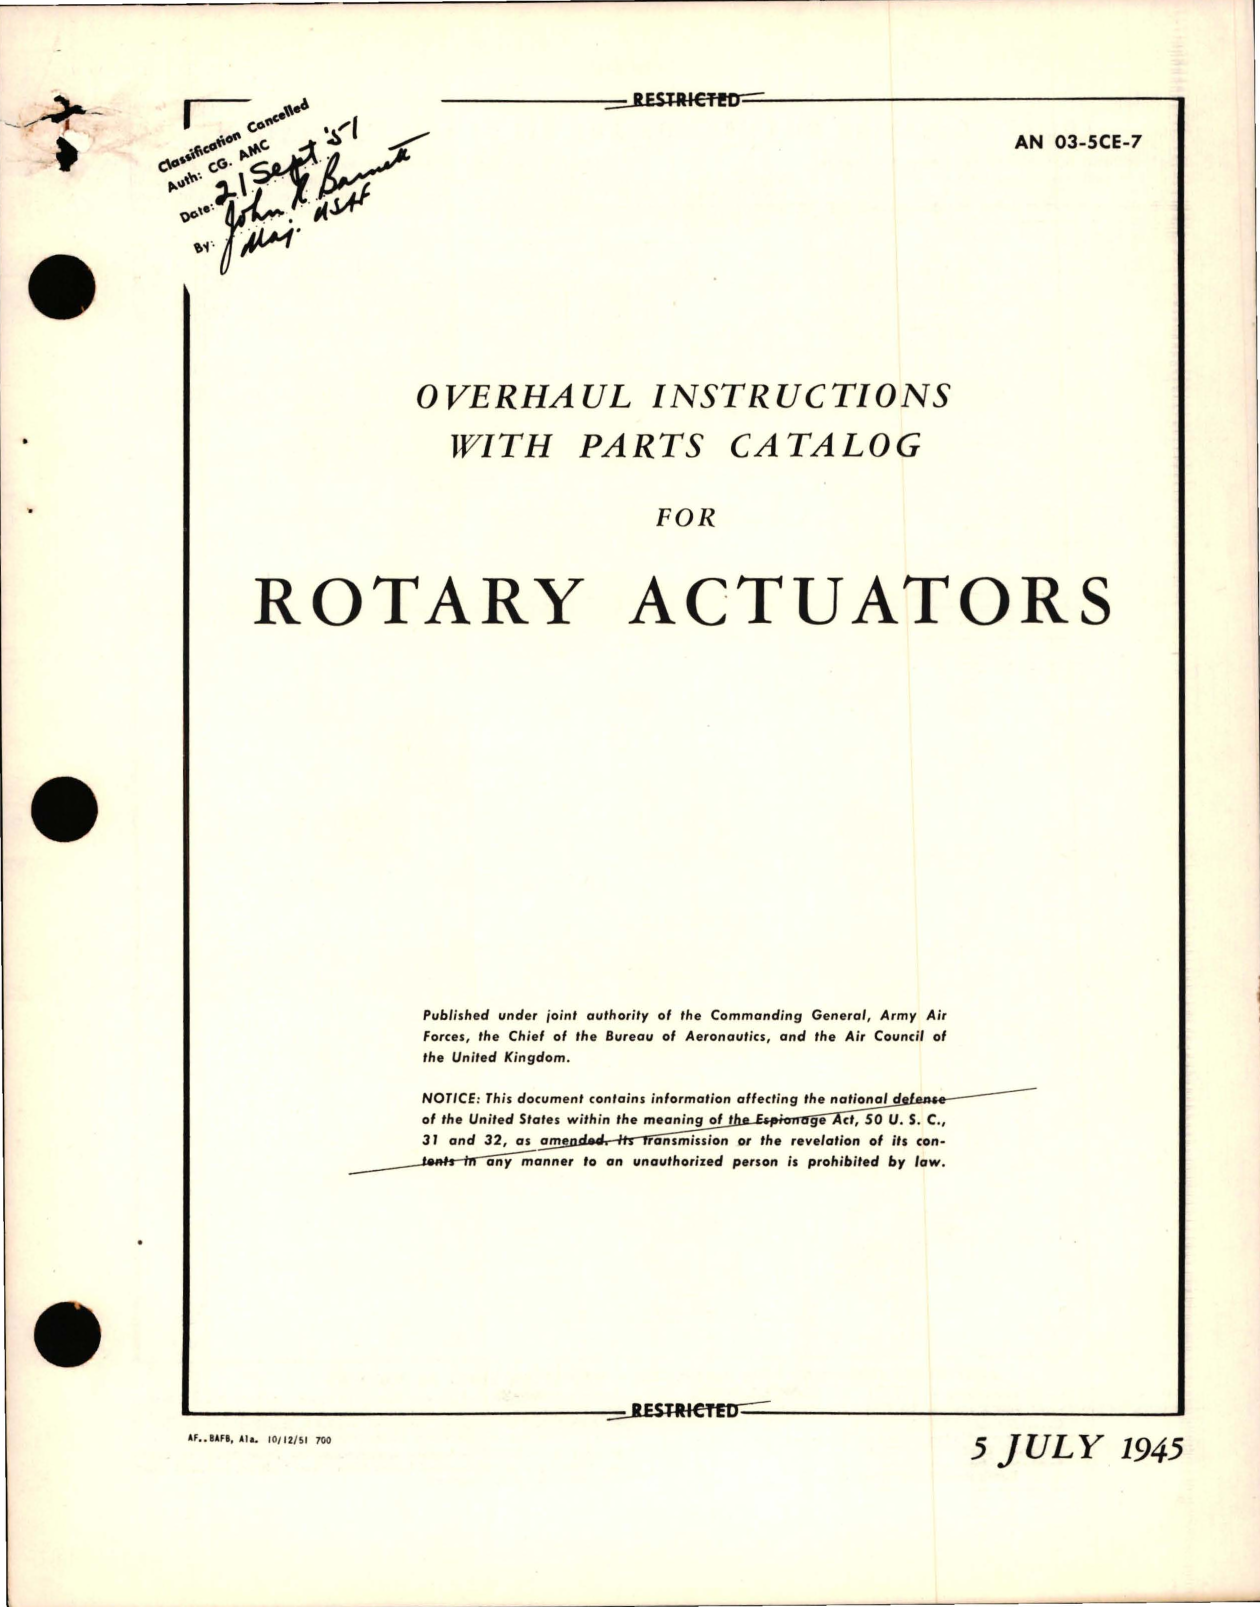 Sample page 5 from AirCorps Library document: Overhaul Instructions with Parts Catalog for Rotary Actuators